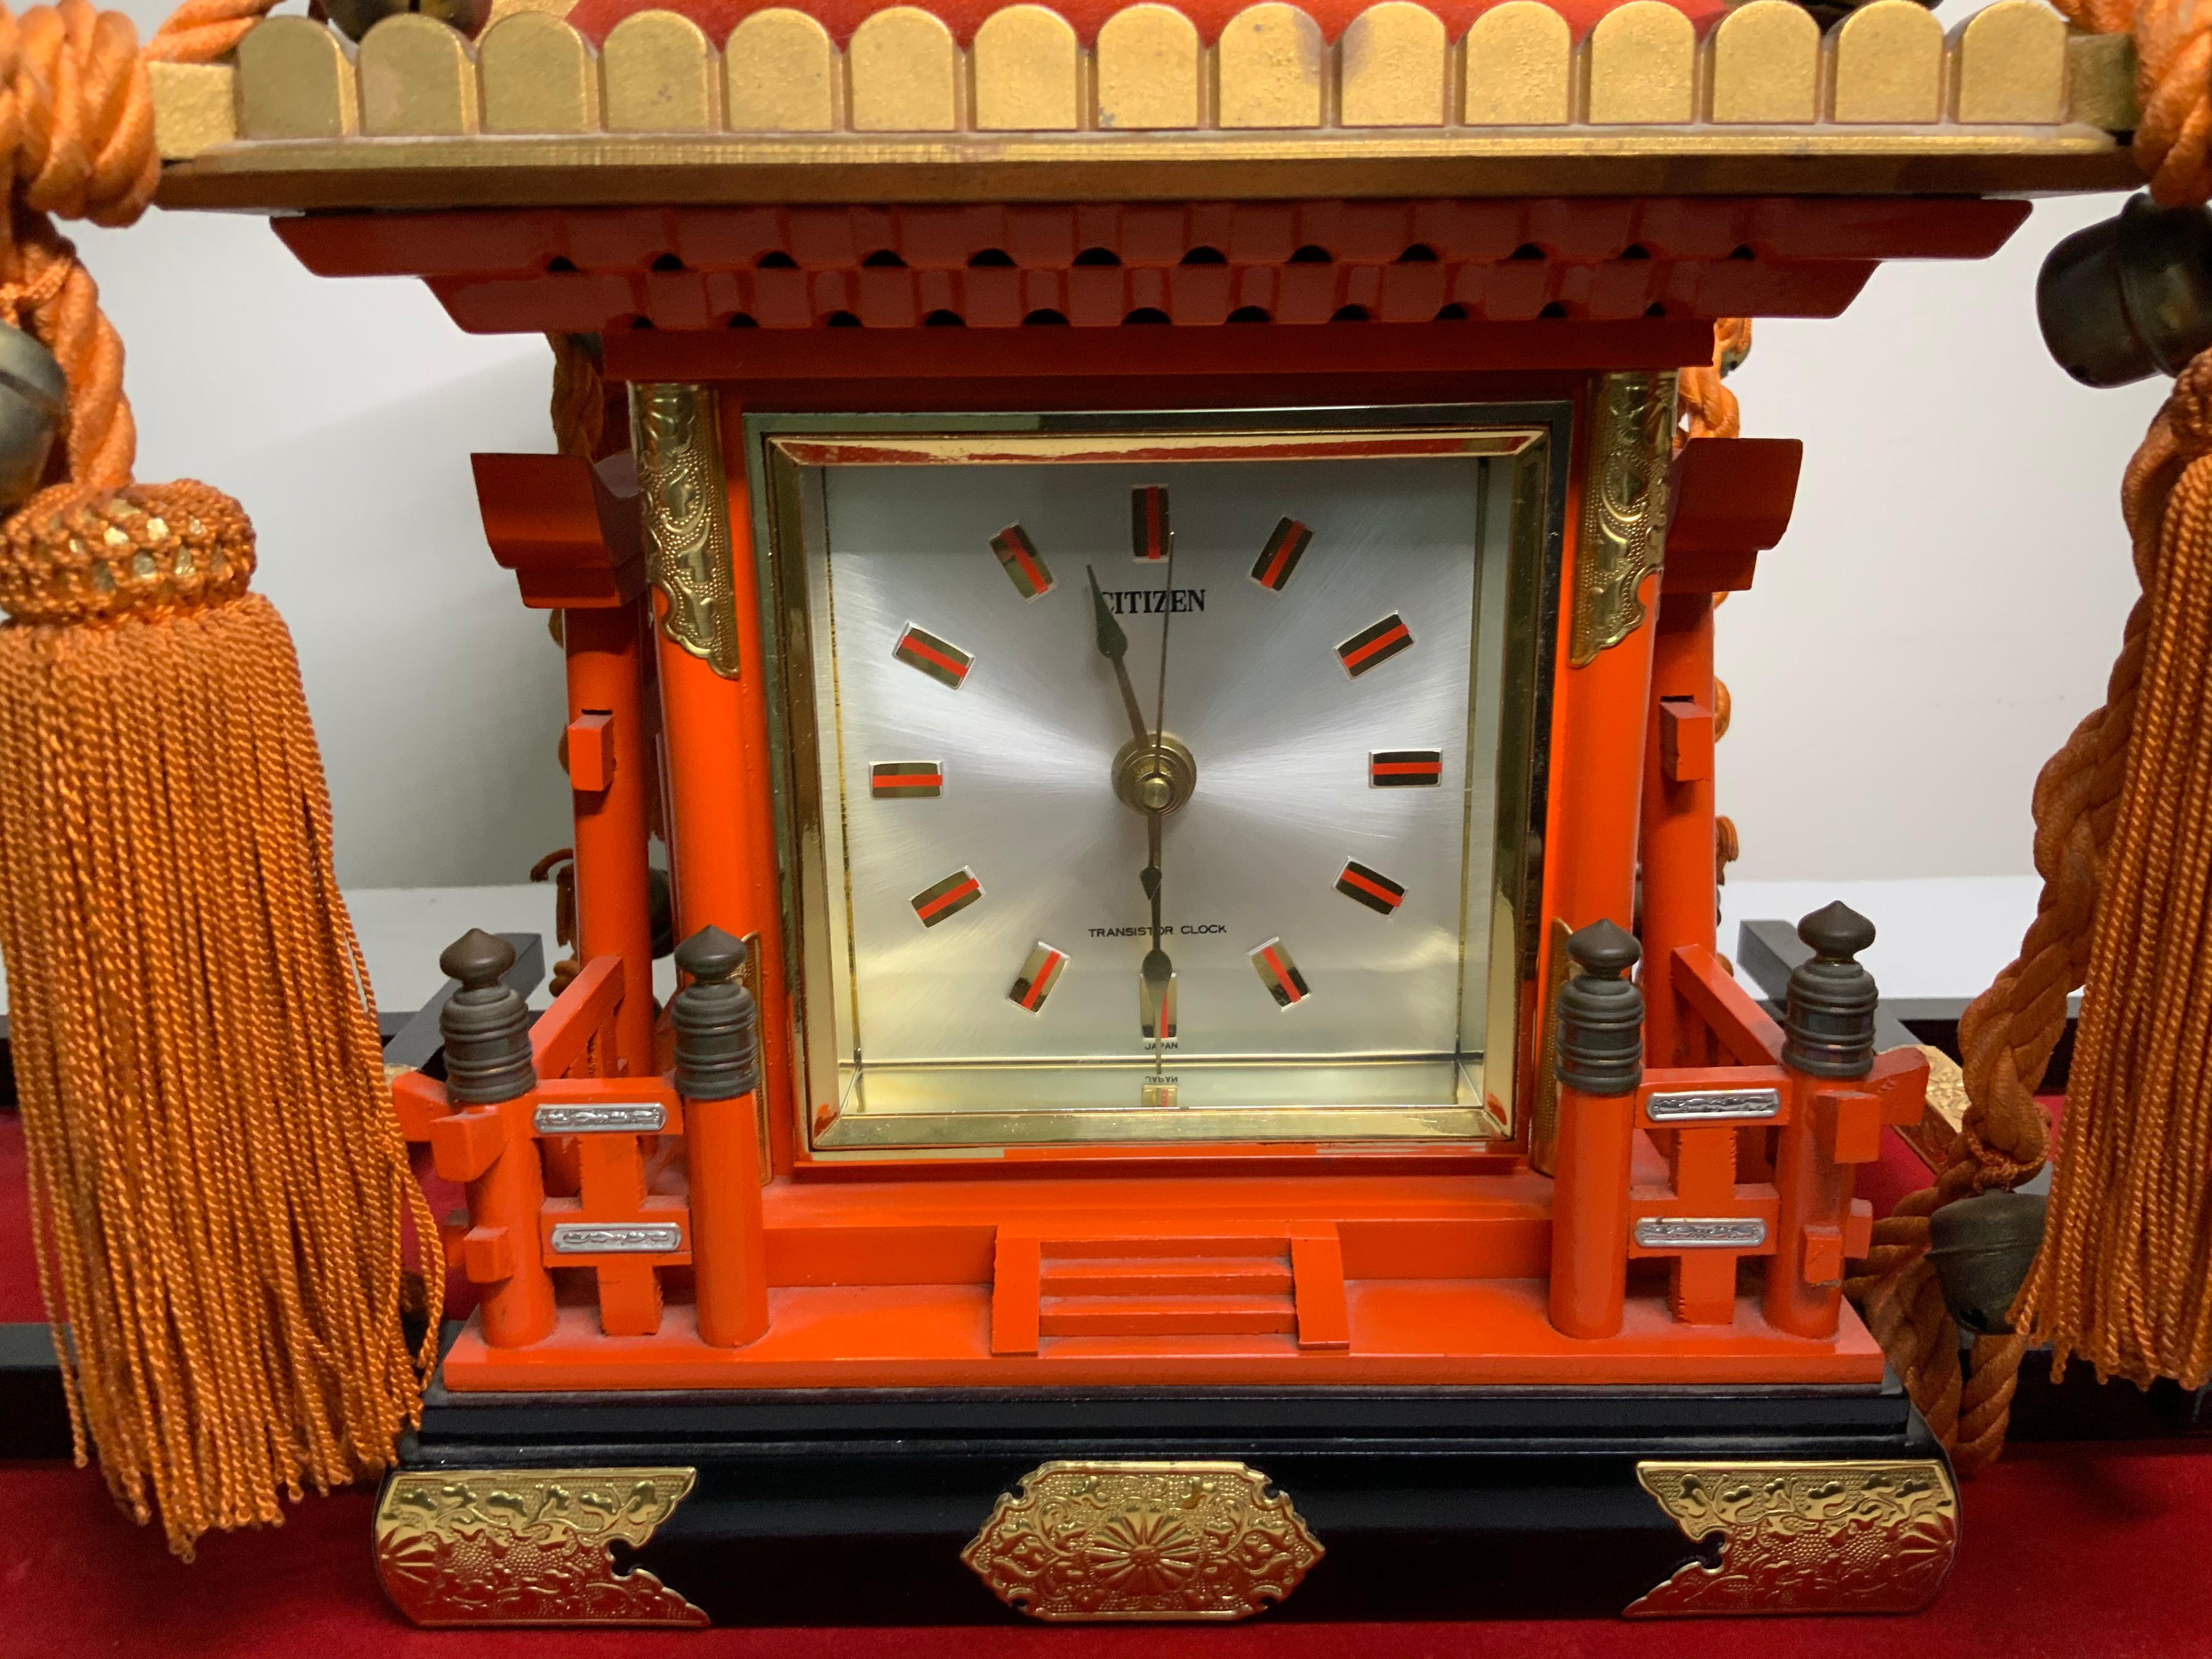 This is a square Citizen clock mounted in a shaped Mikoshi Palanquin-Shinto Shrine wood (This is a vehicle that the Japanese people used to transport a deity during festivals). The Mikoshi is hand painted orange with gold details. There is a large